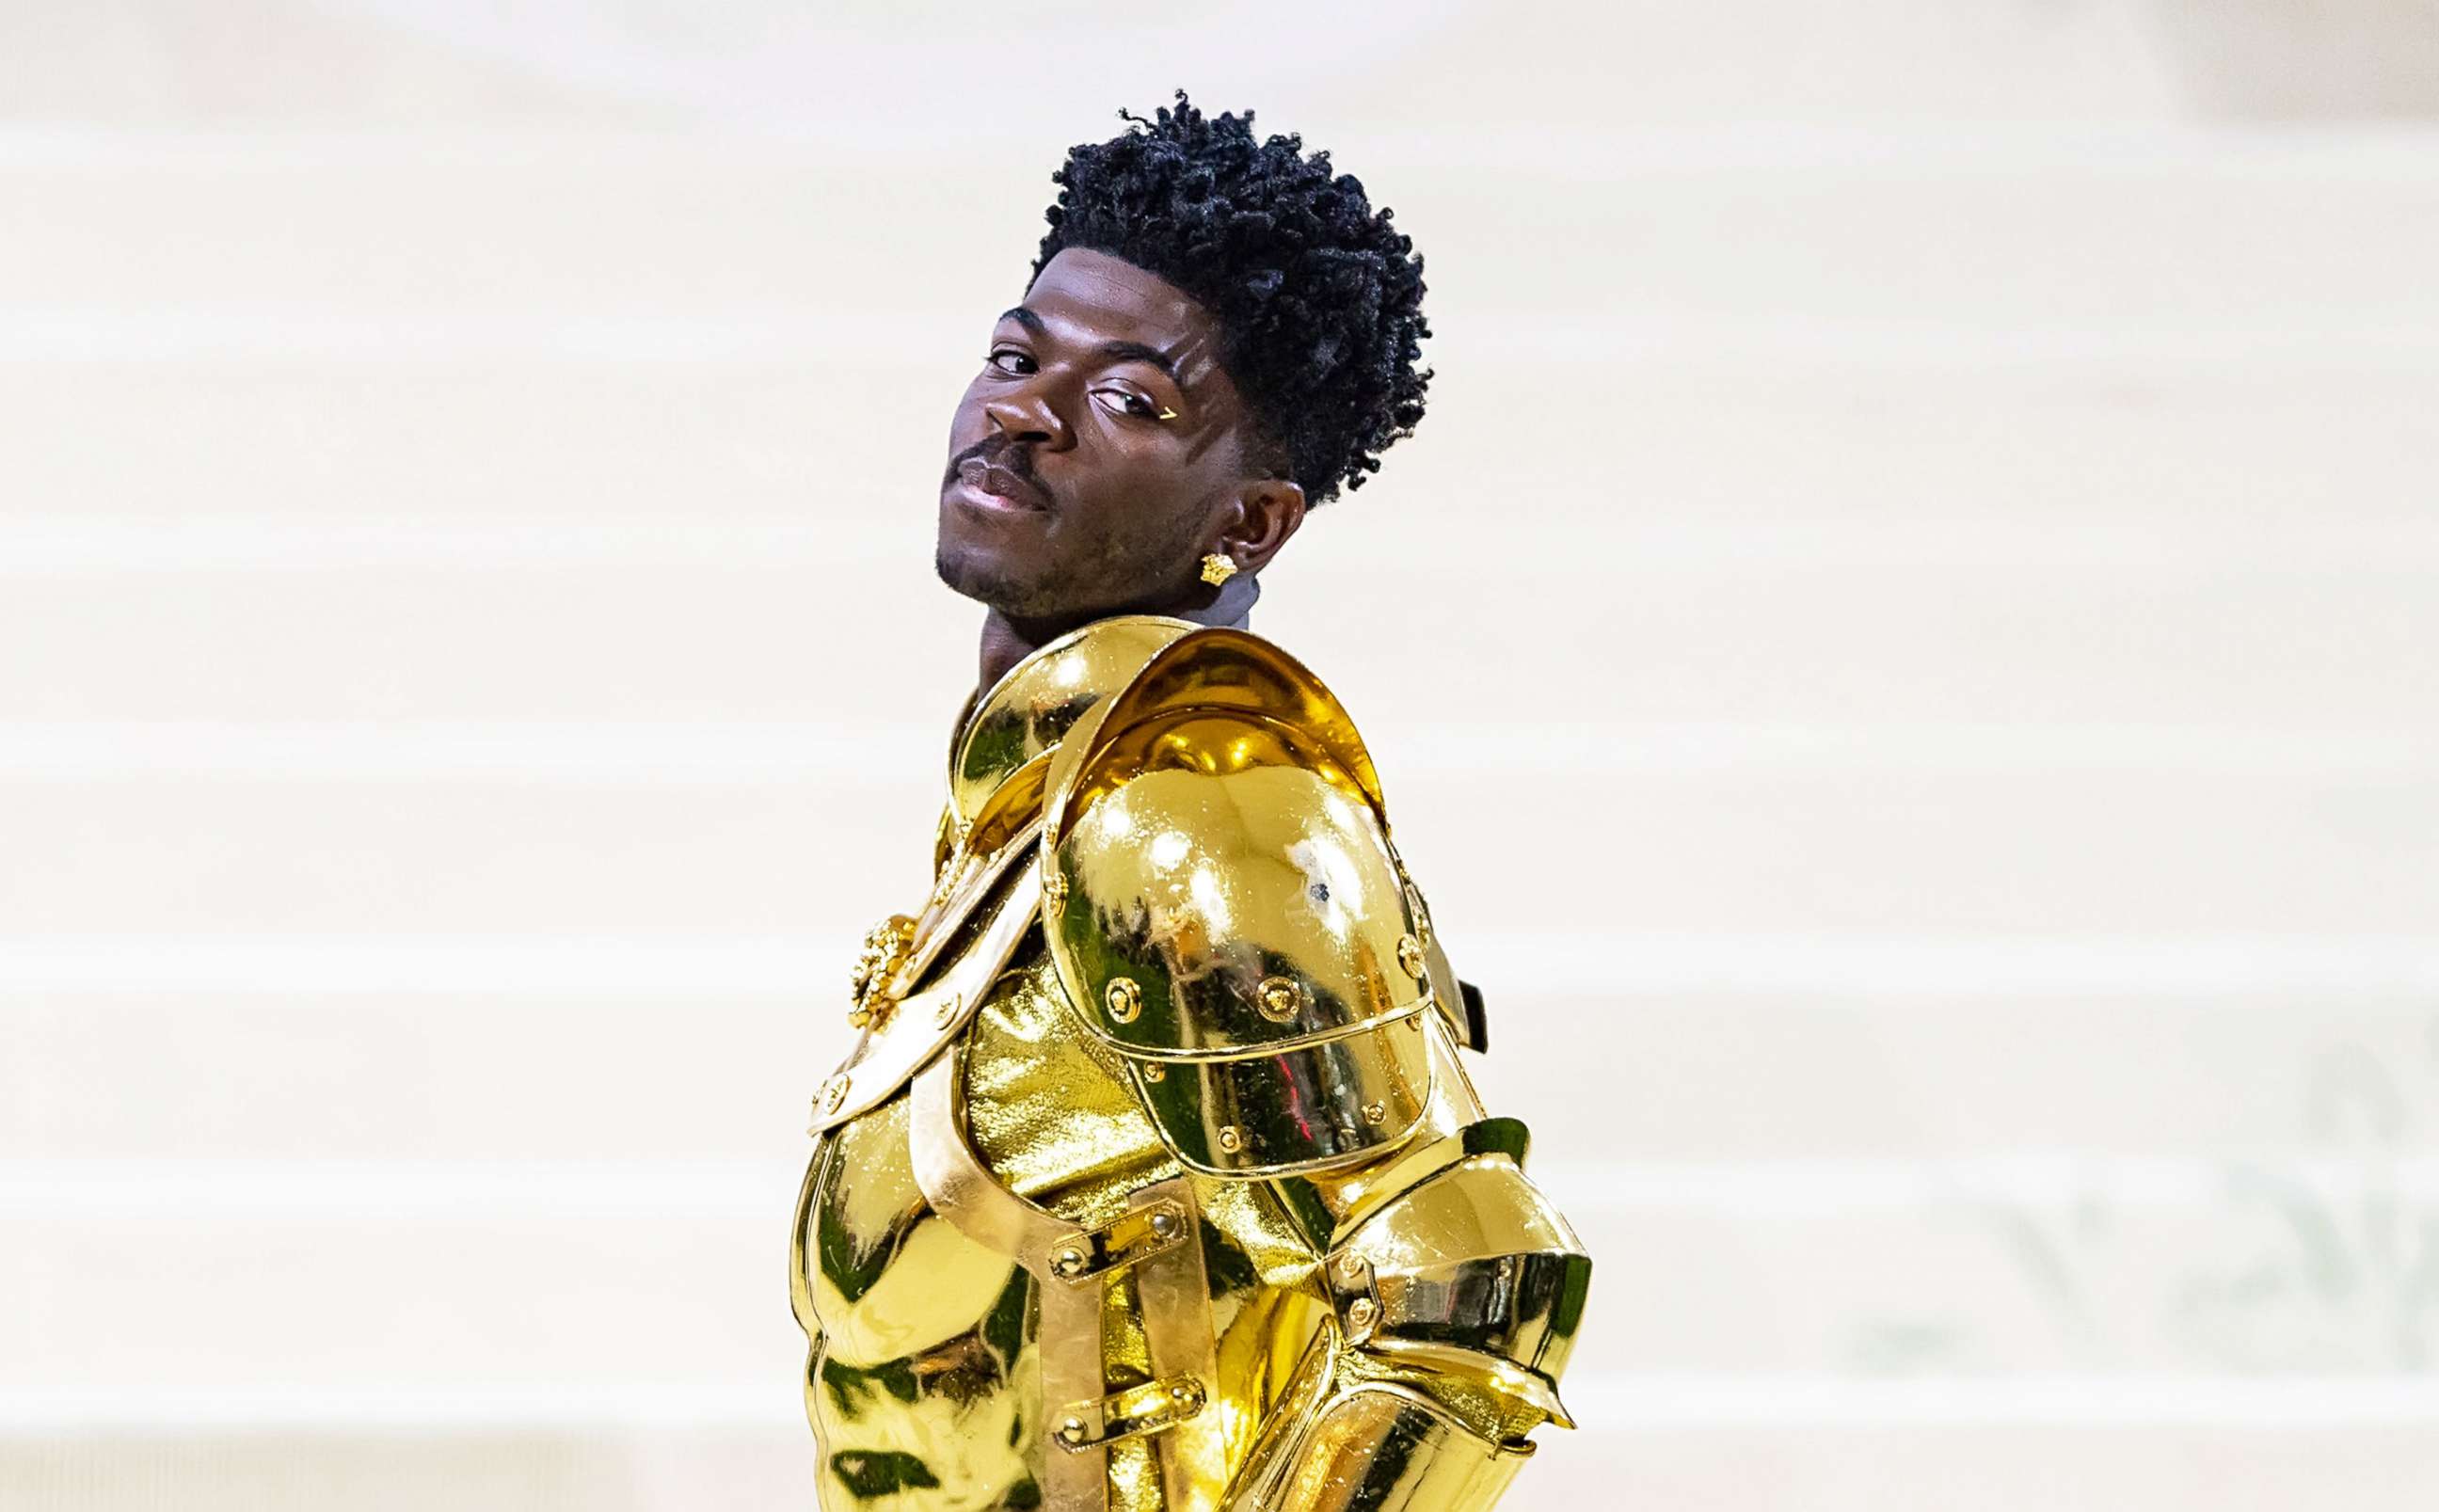 PHOTO: Rapper Lil Nas X attends The 2021 Met Gala Celebrating In America: A Lexicon Of Fashion at The Metropolitan Museum of Art on Sept. 13, 2021, in New York City.